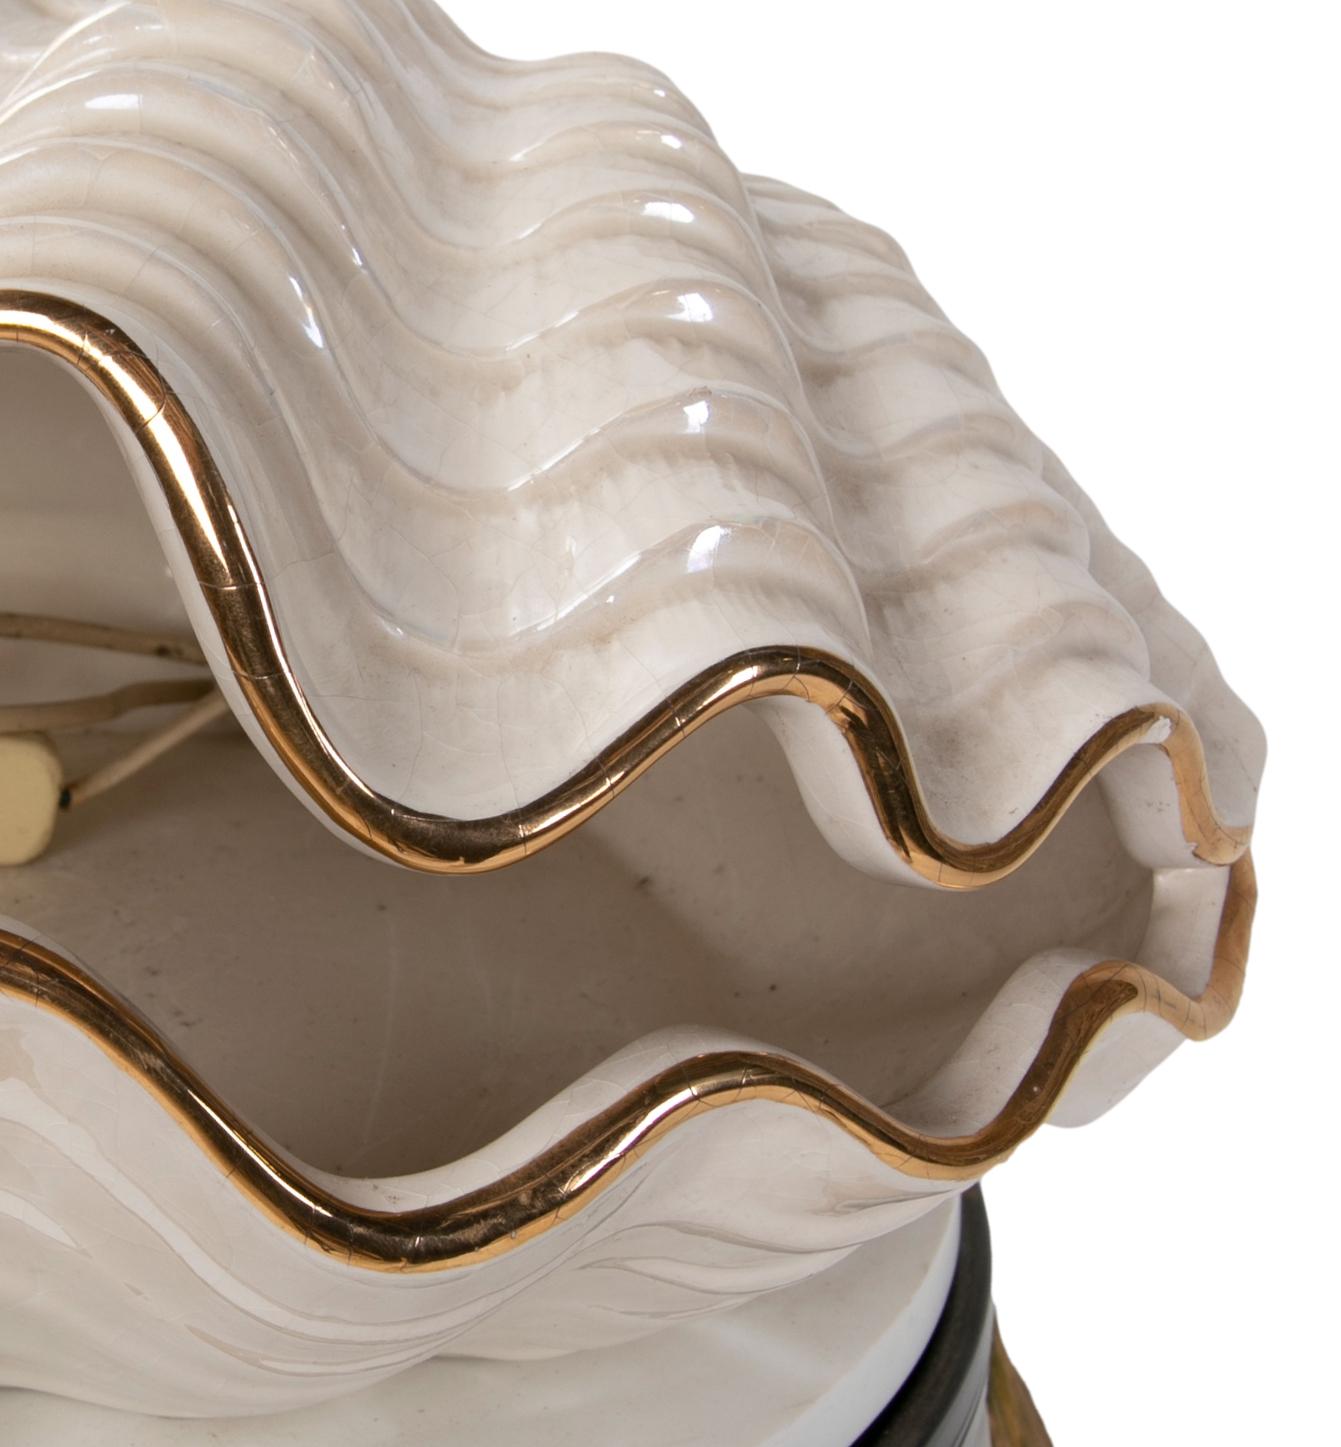 1980s Ceramic Shell-Shaped Table Lamp with Gilded Edges For Sale 9